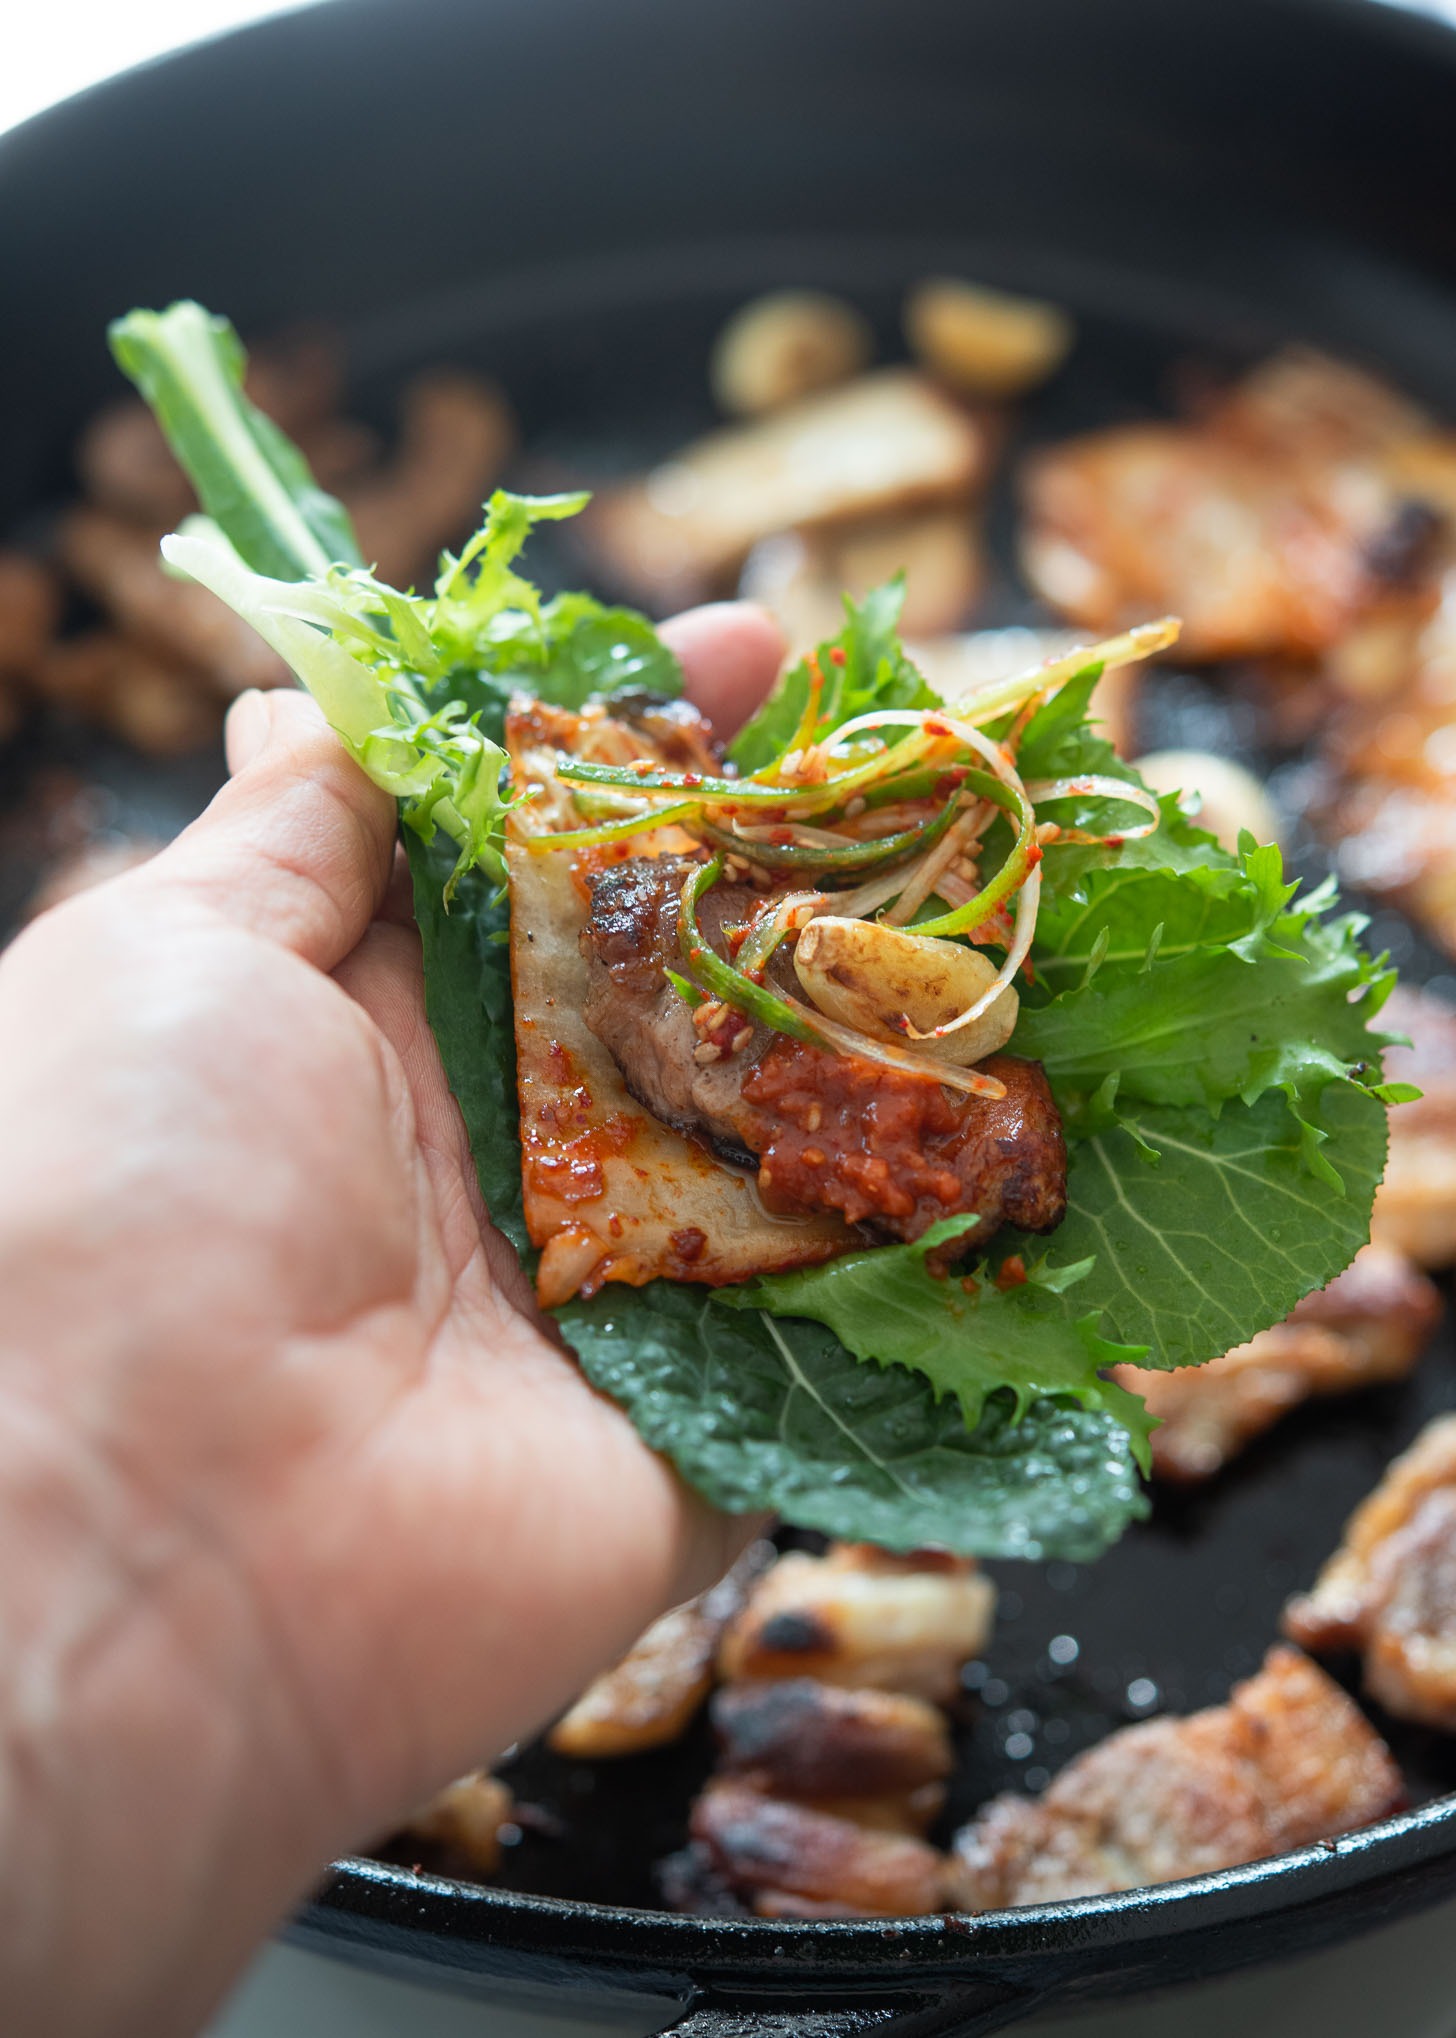 A Korean lettuce wrap filled with meat and condiments is placed on hand.